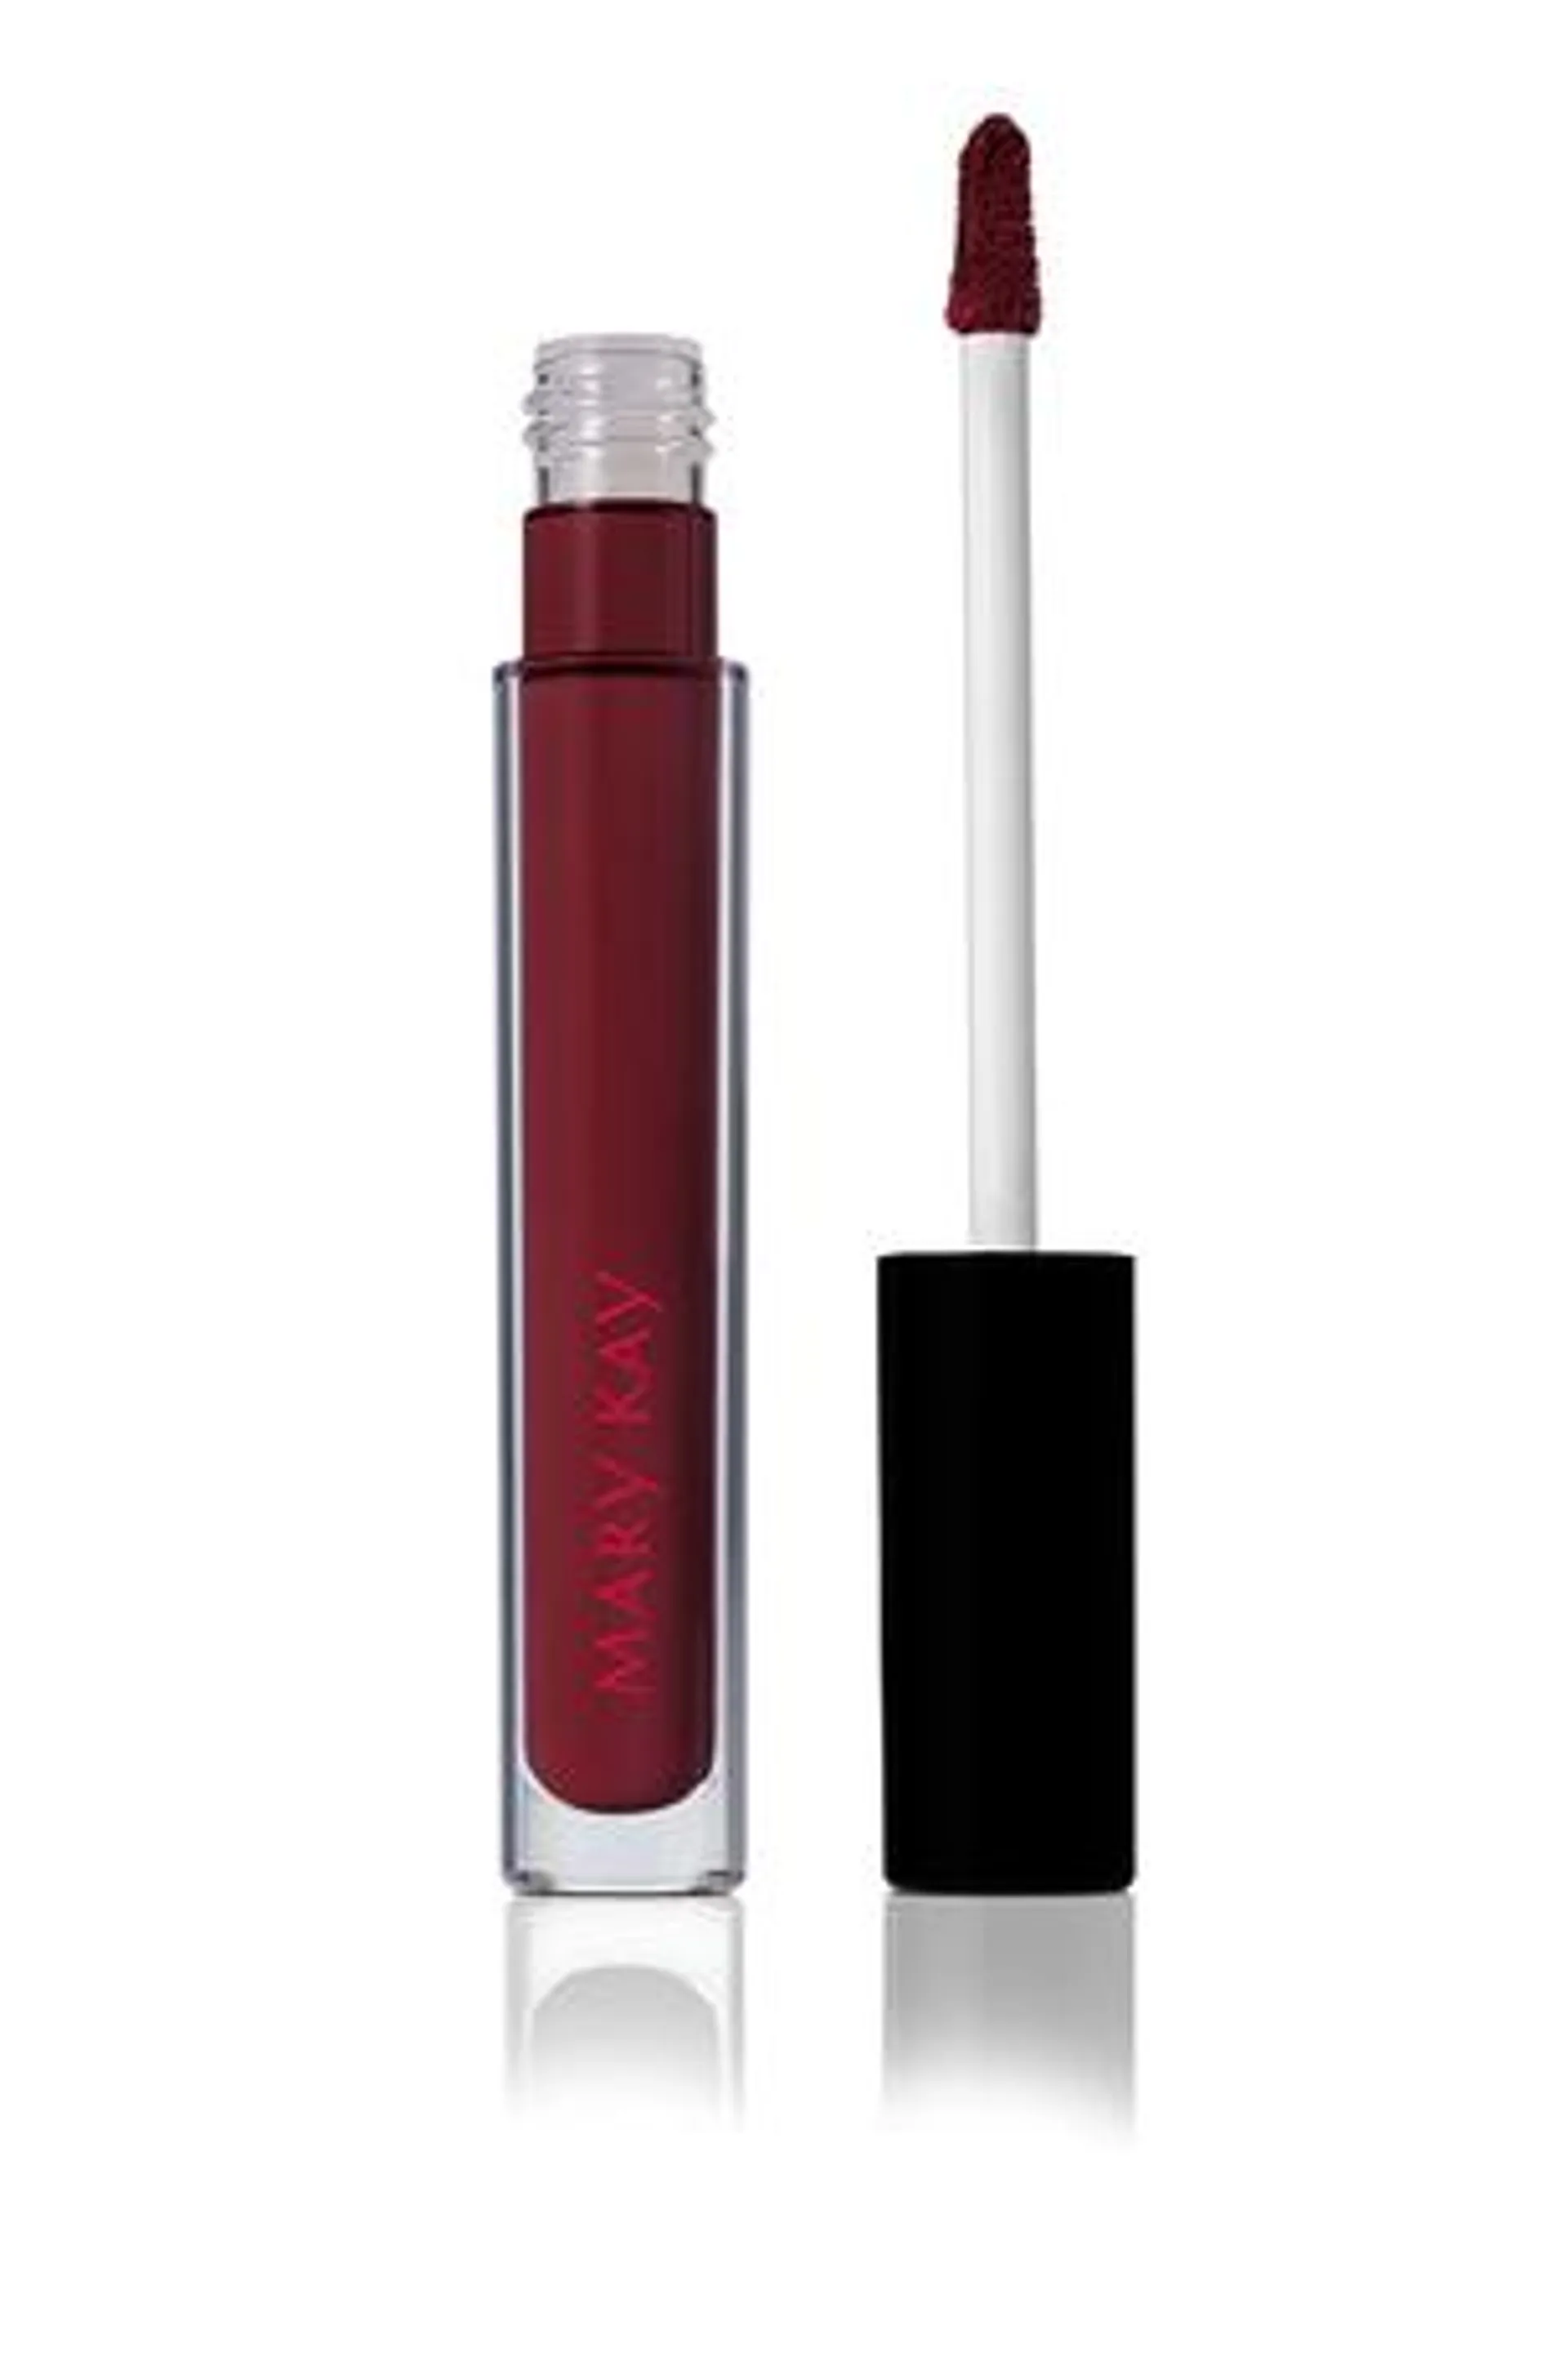 Special-Edition† Mary Kay® Matte Liquid Lipstick